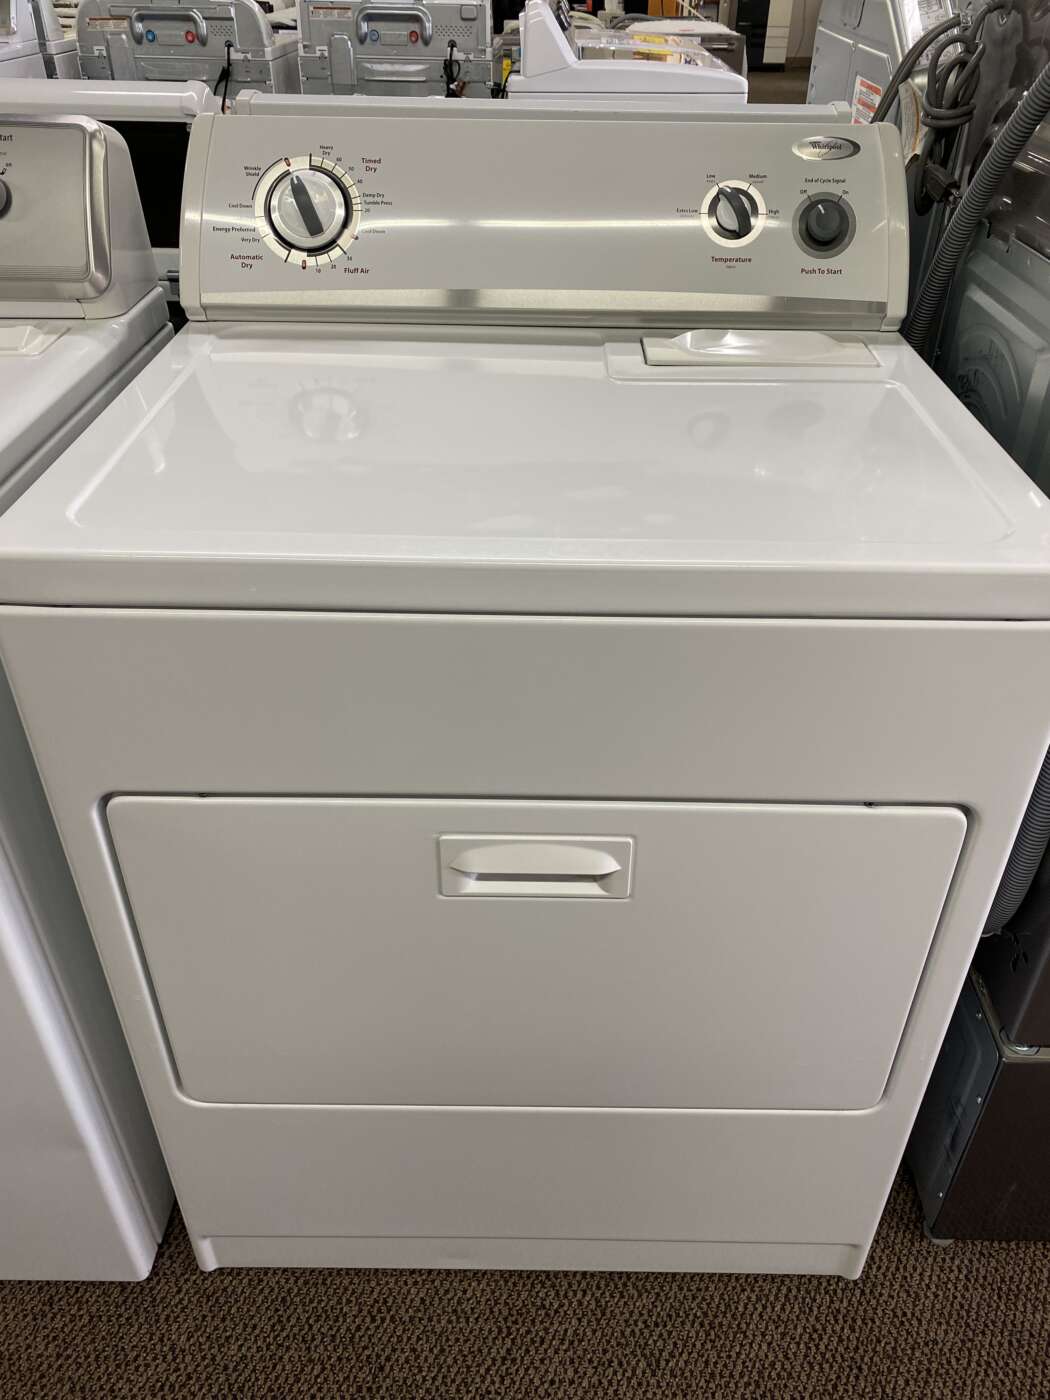 Reconditioned WHIRLPOOL 6.5 Cu. Ft. Electric Dryer – White